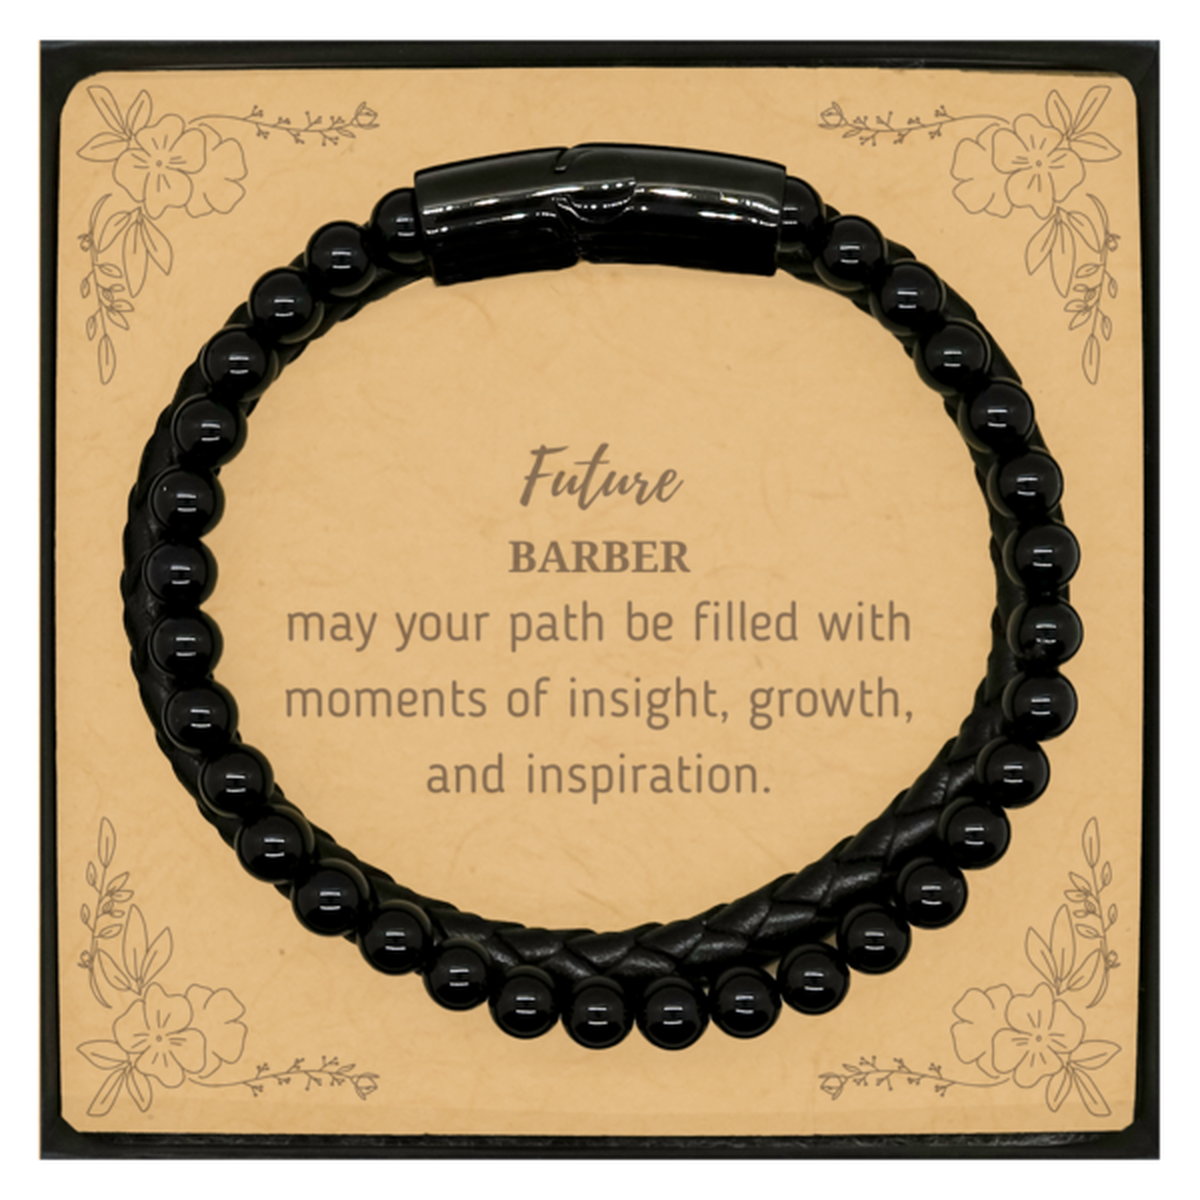 Future Barber Gifts, May your path be filled with moments of insight, Graduation Gifts for New Barber, Christmas Unique Stone Leather Bracelets For Men, Women, Friends